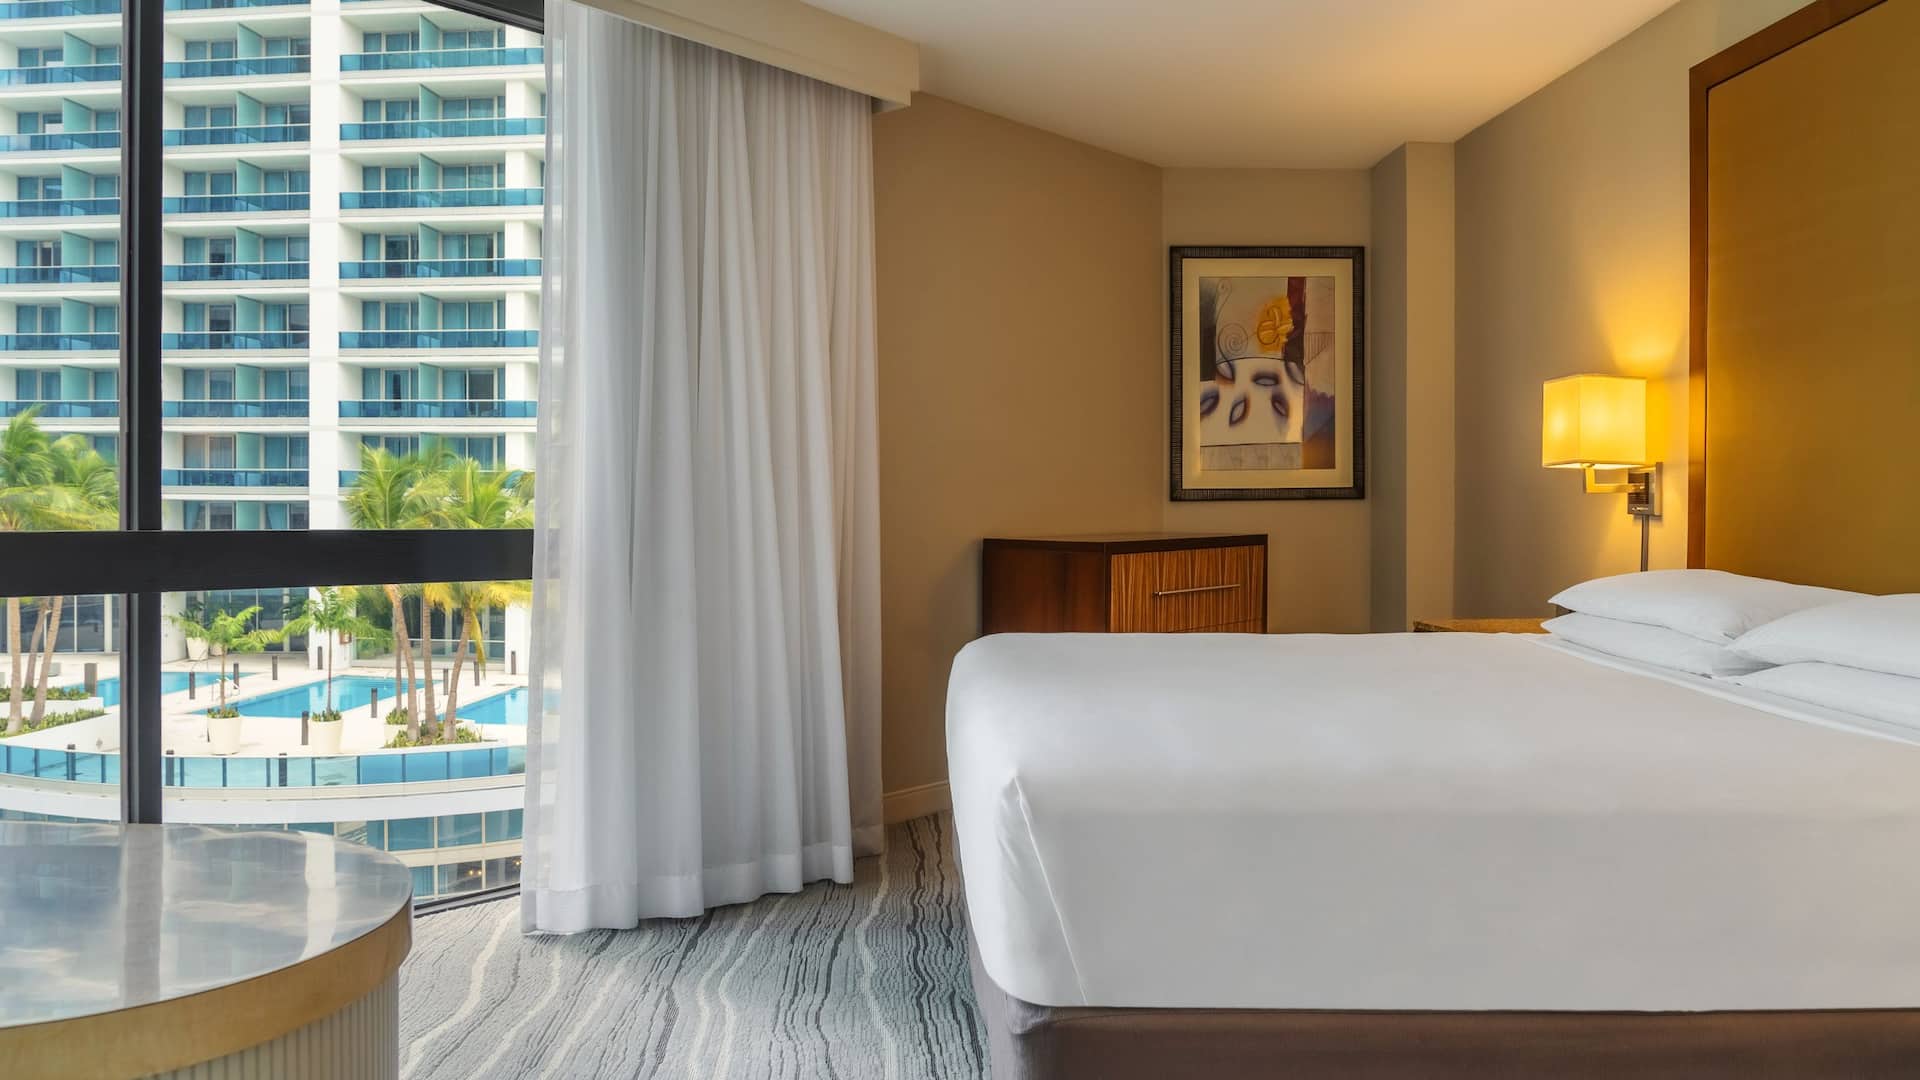 A downtown Miami hotel suite with a view of the rooftop pool